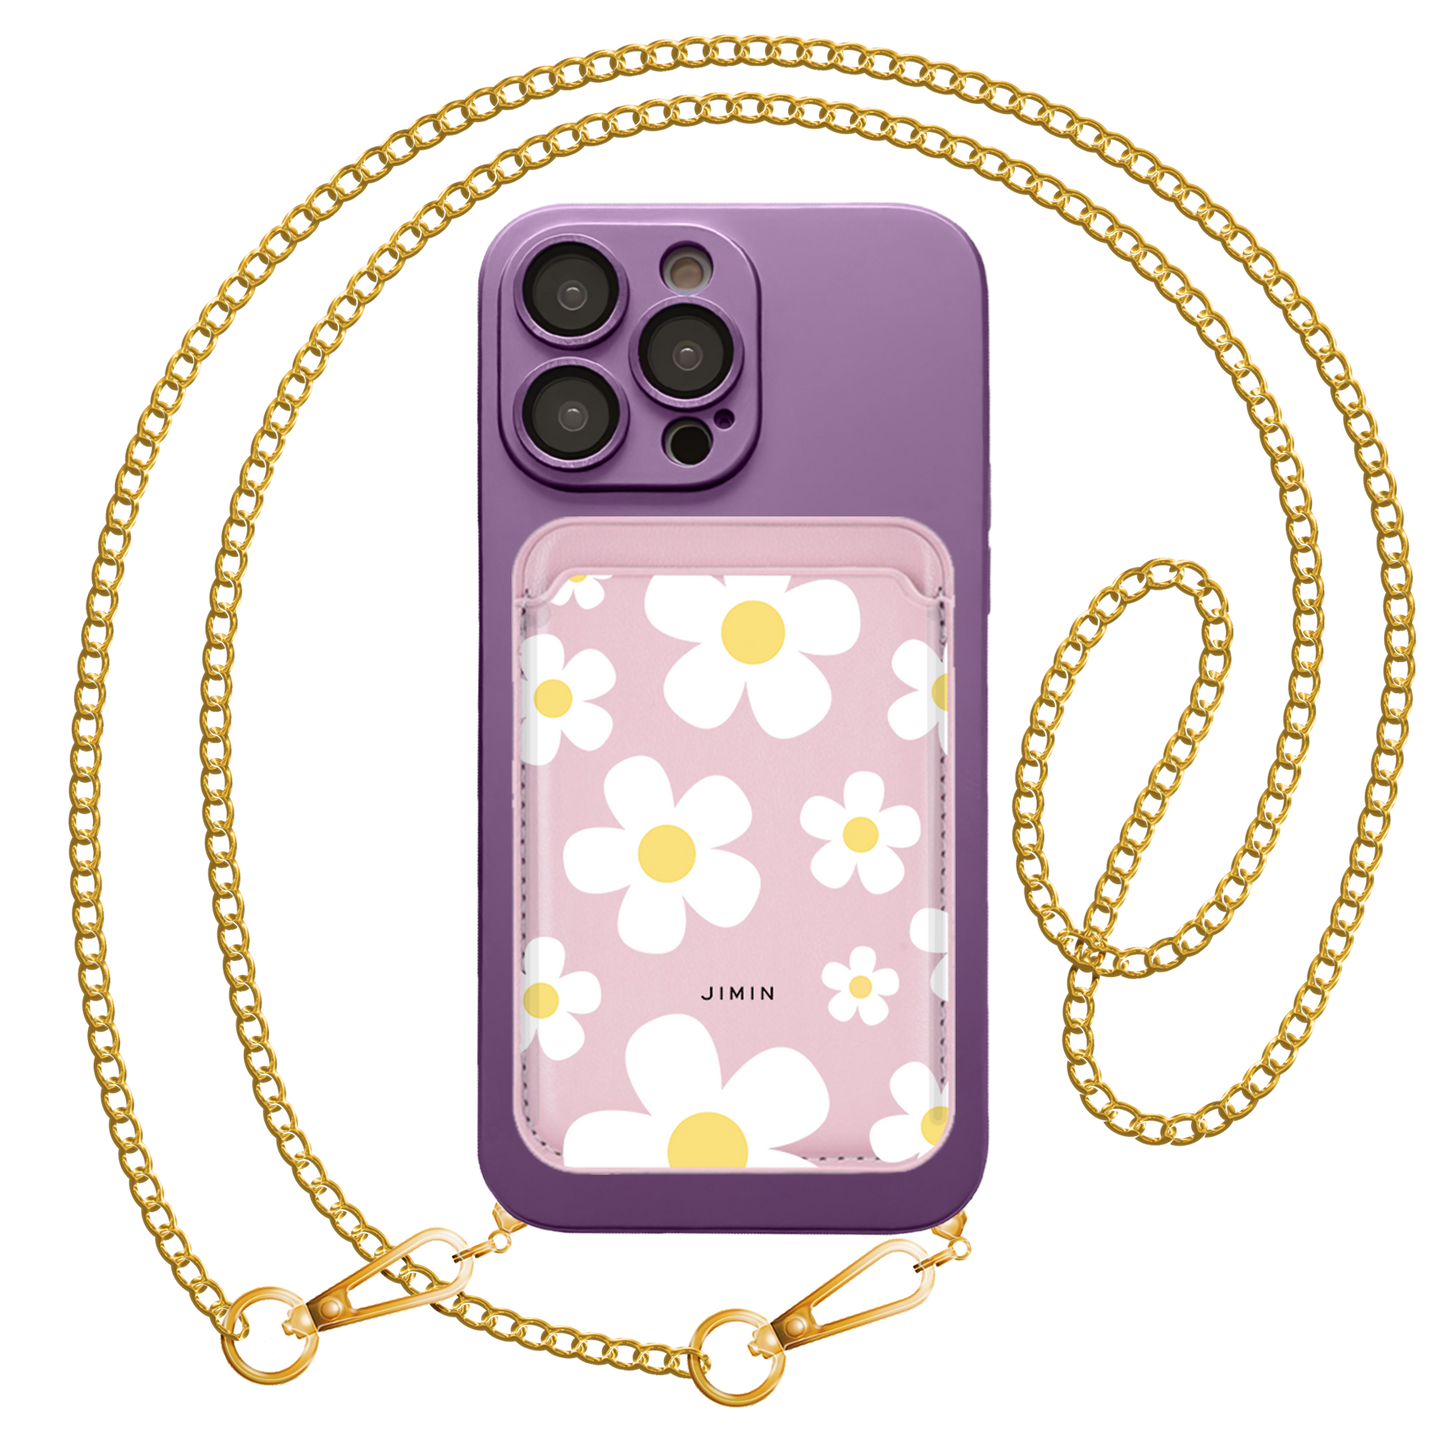 iPhone Magnetic Wallet Silicone Case - Daisy 3.0